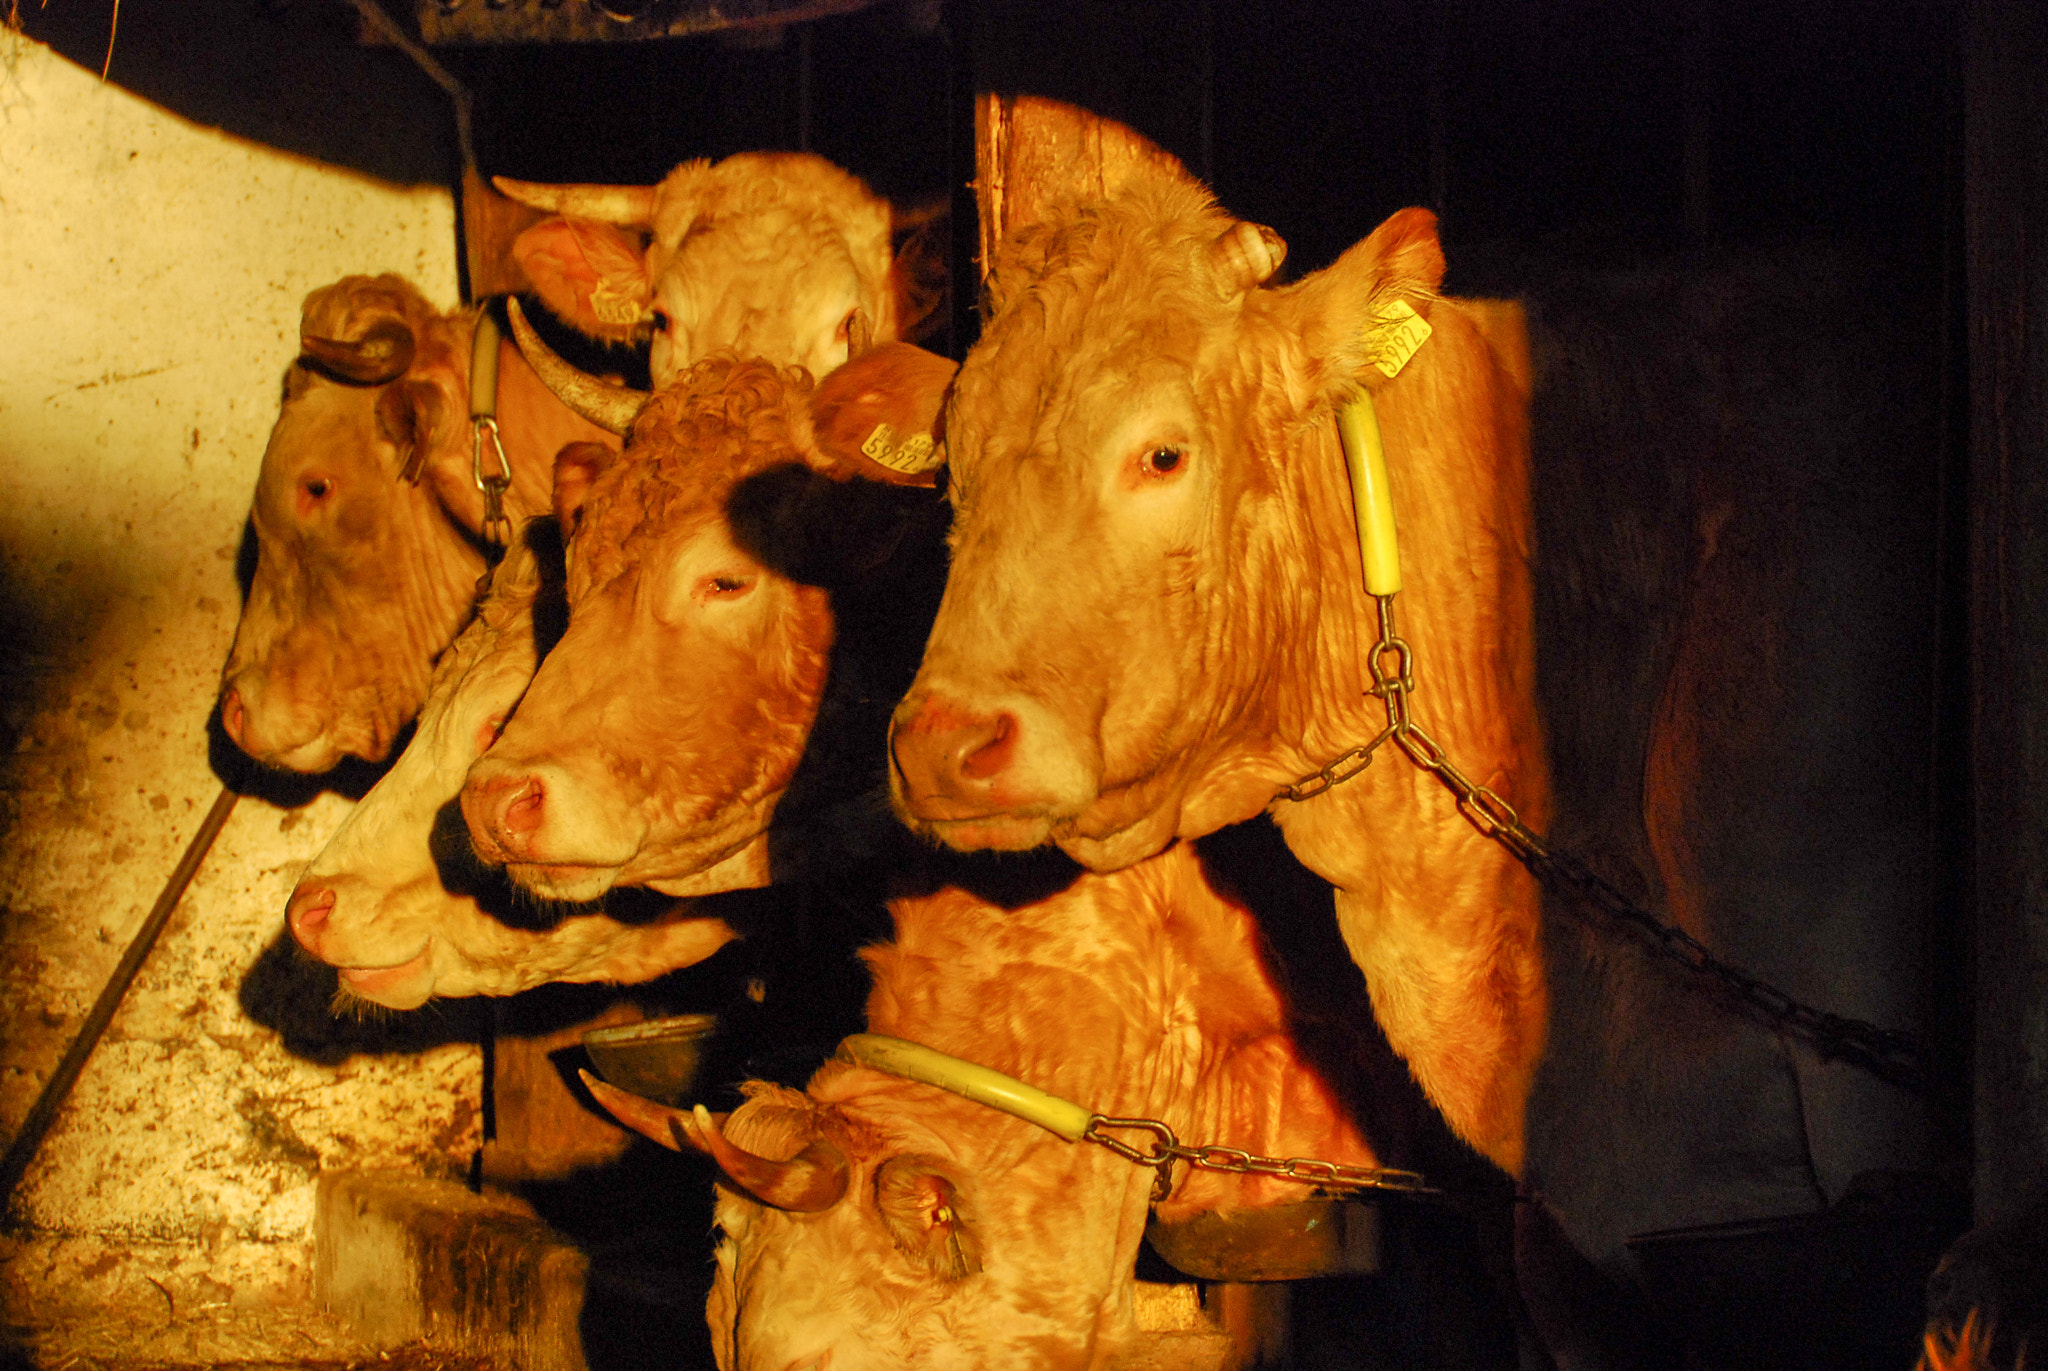 Nikon D80 sample photo. Cows in stable - sunset photography